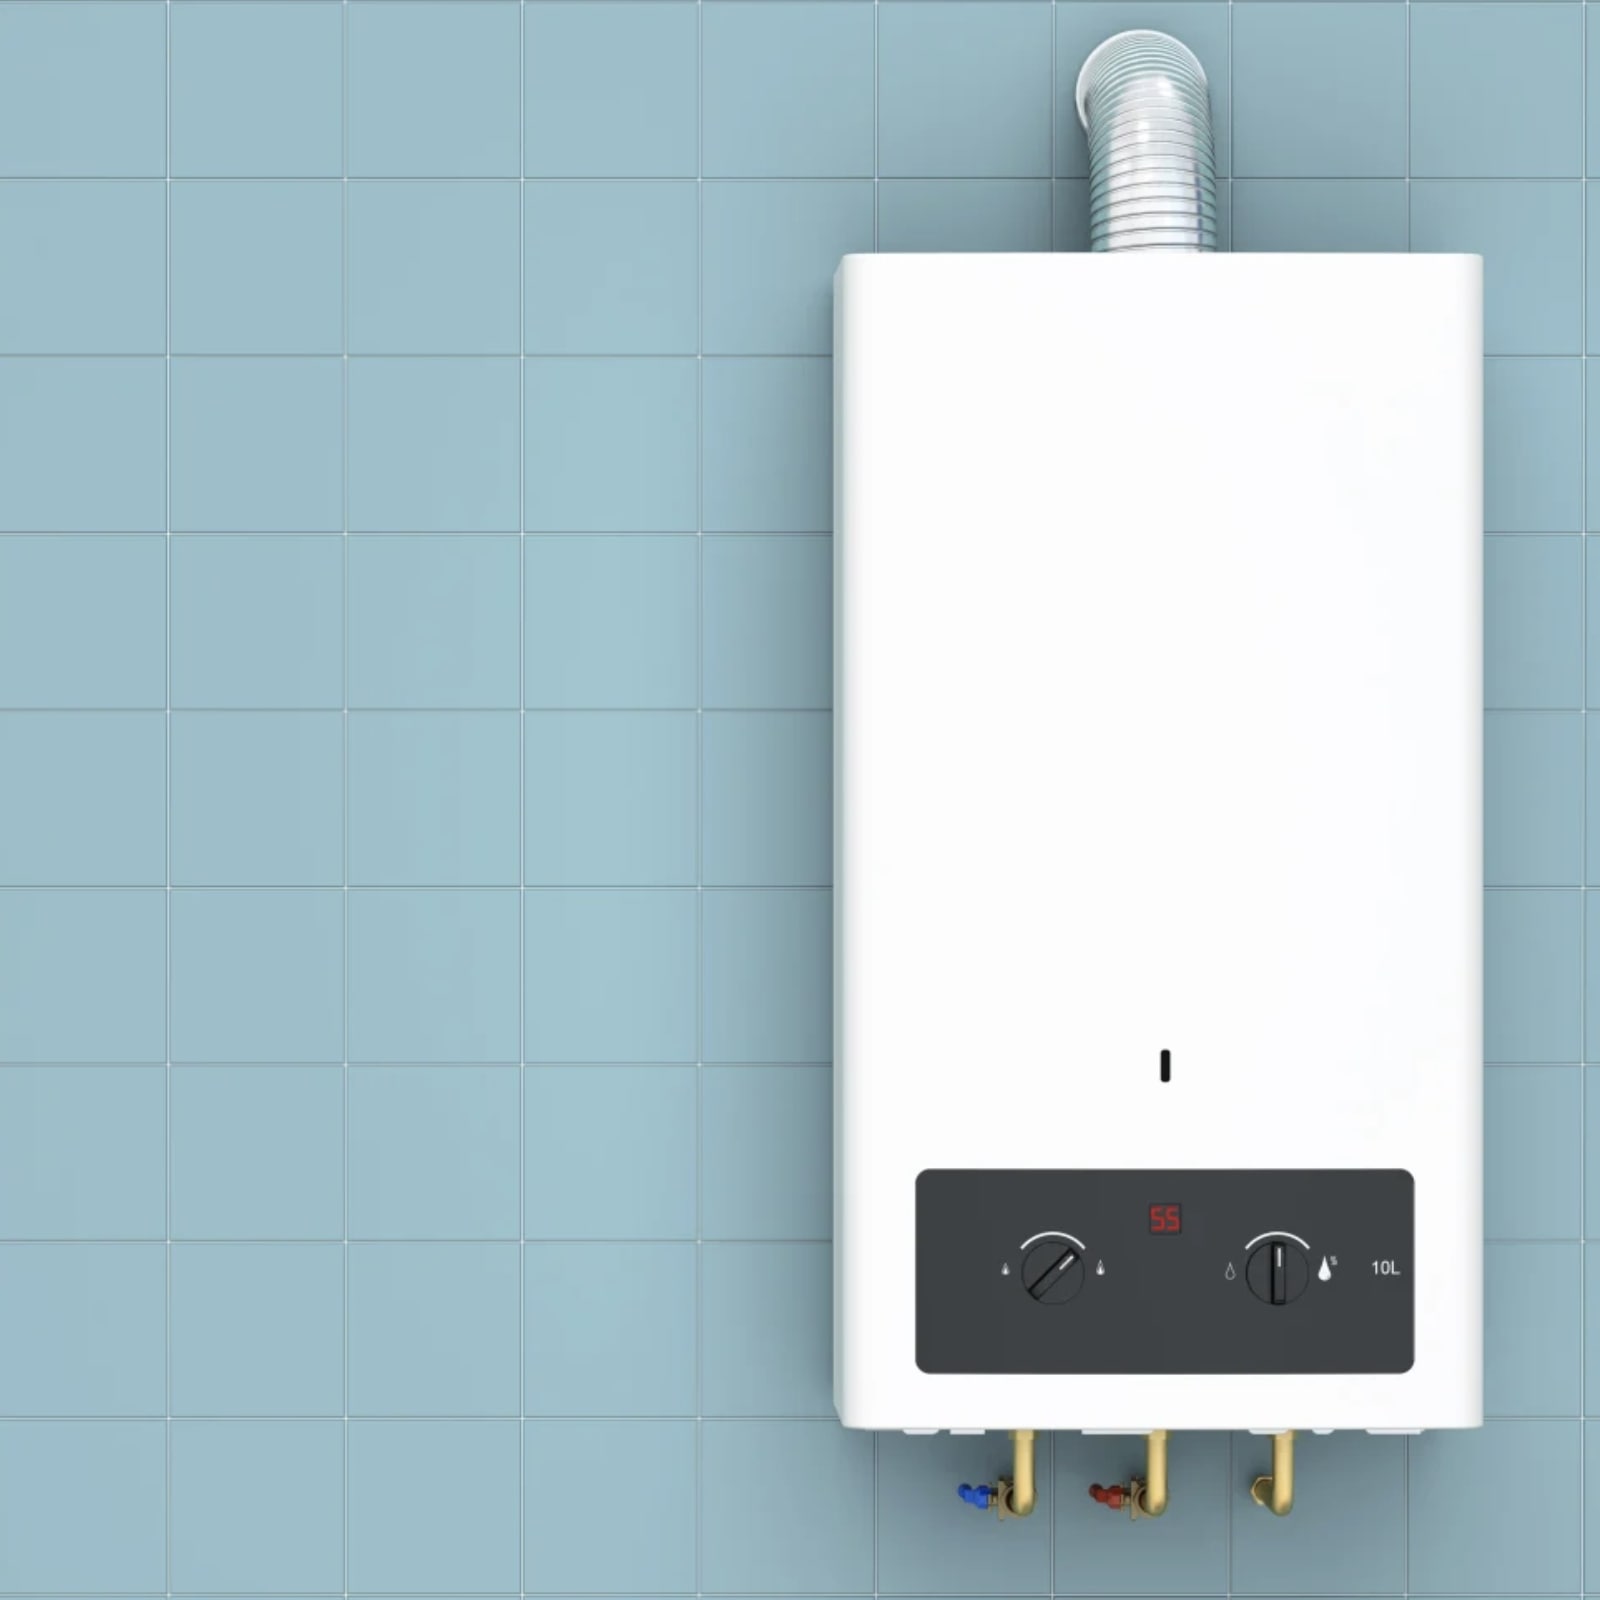 The Energy-Efficient Features of a Tankless Water Heater